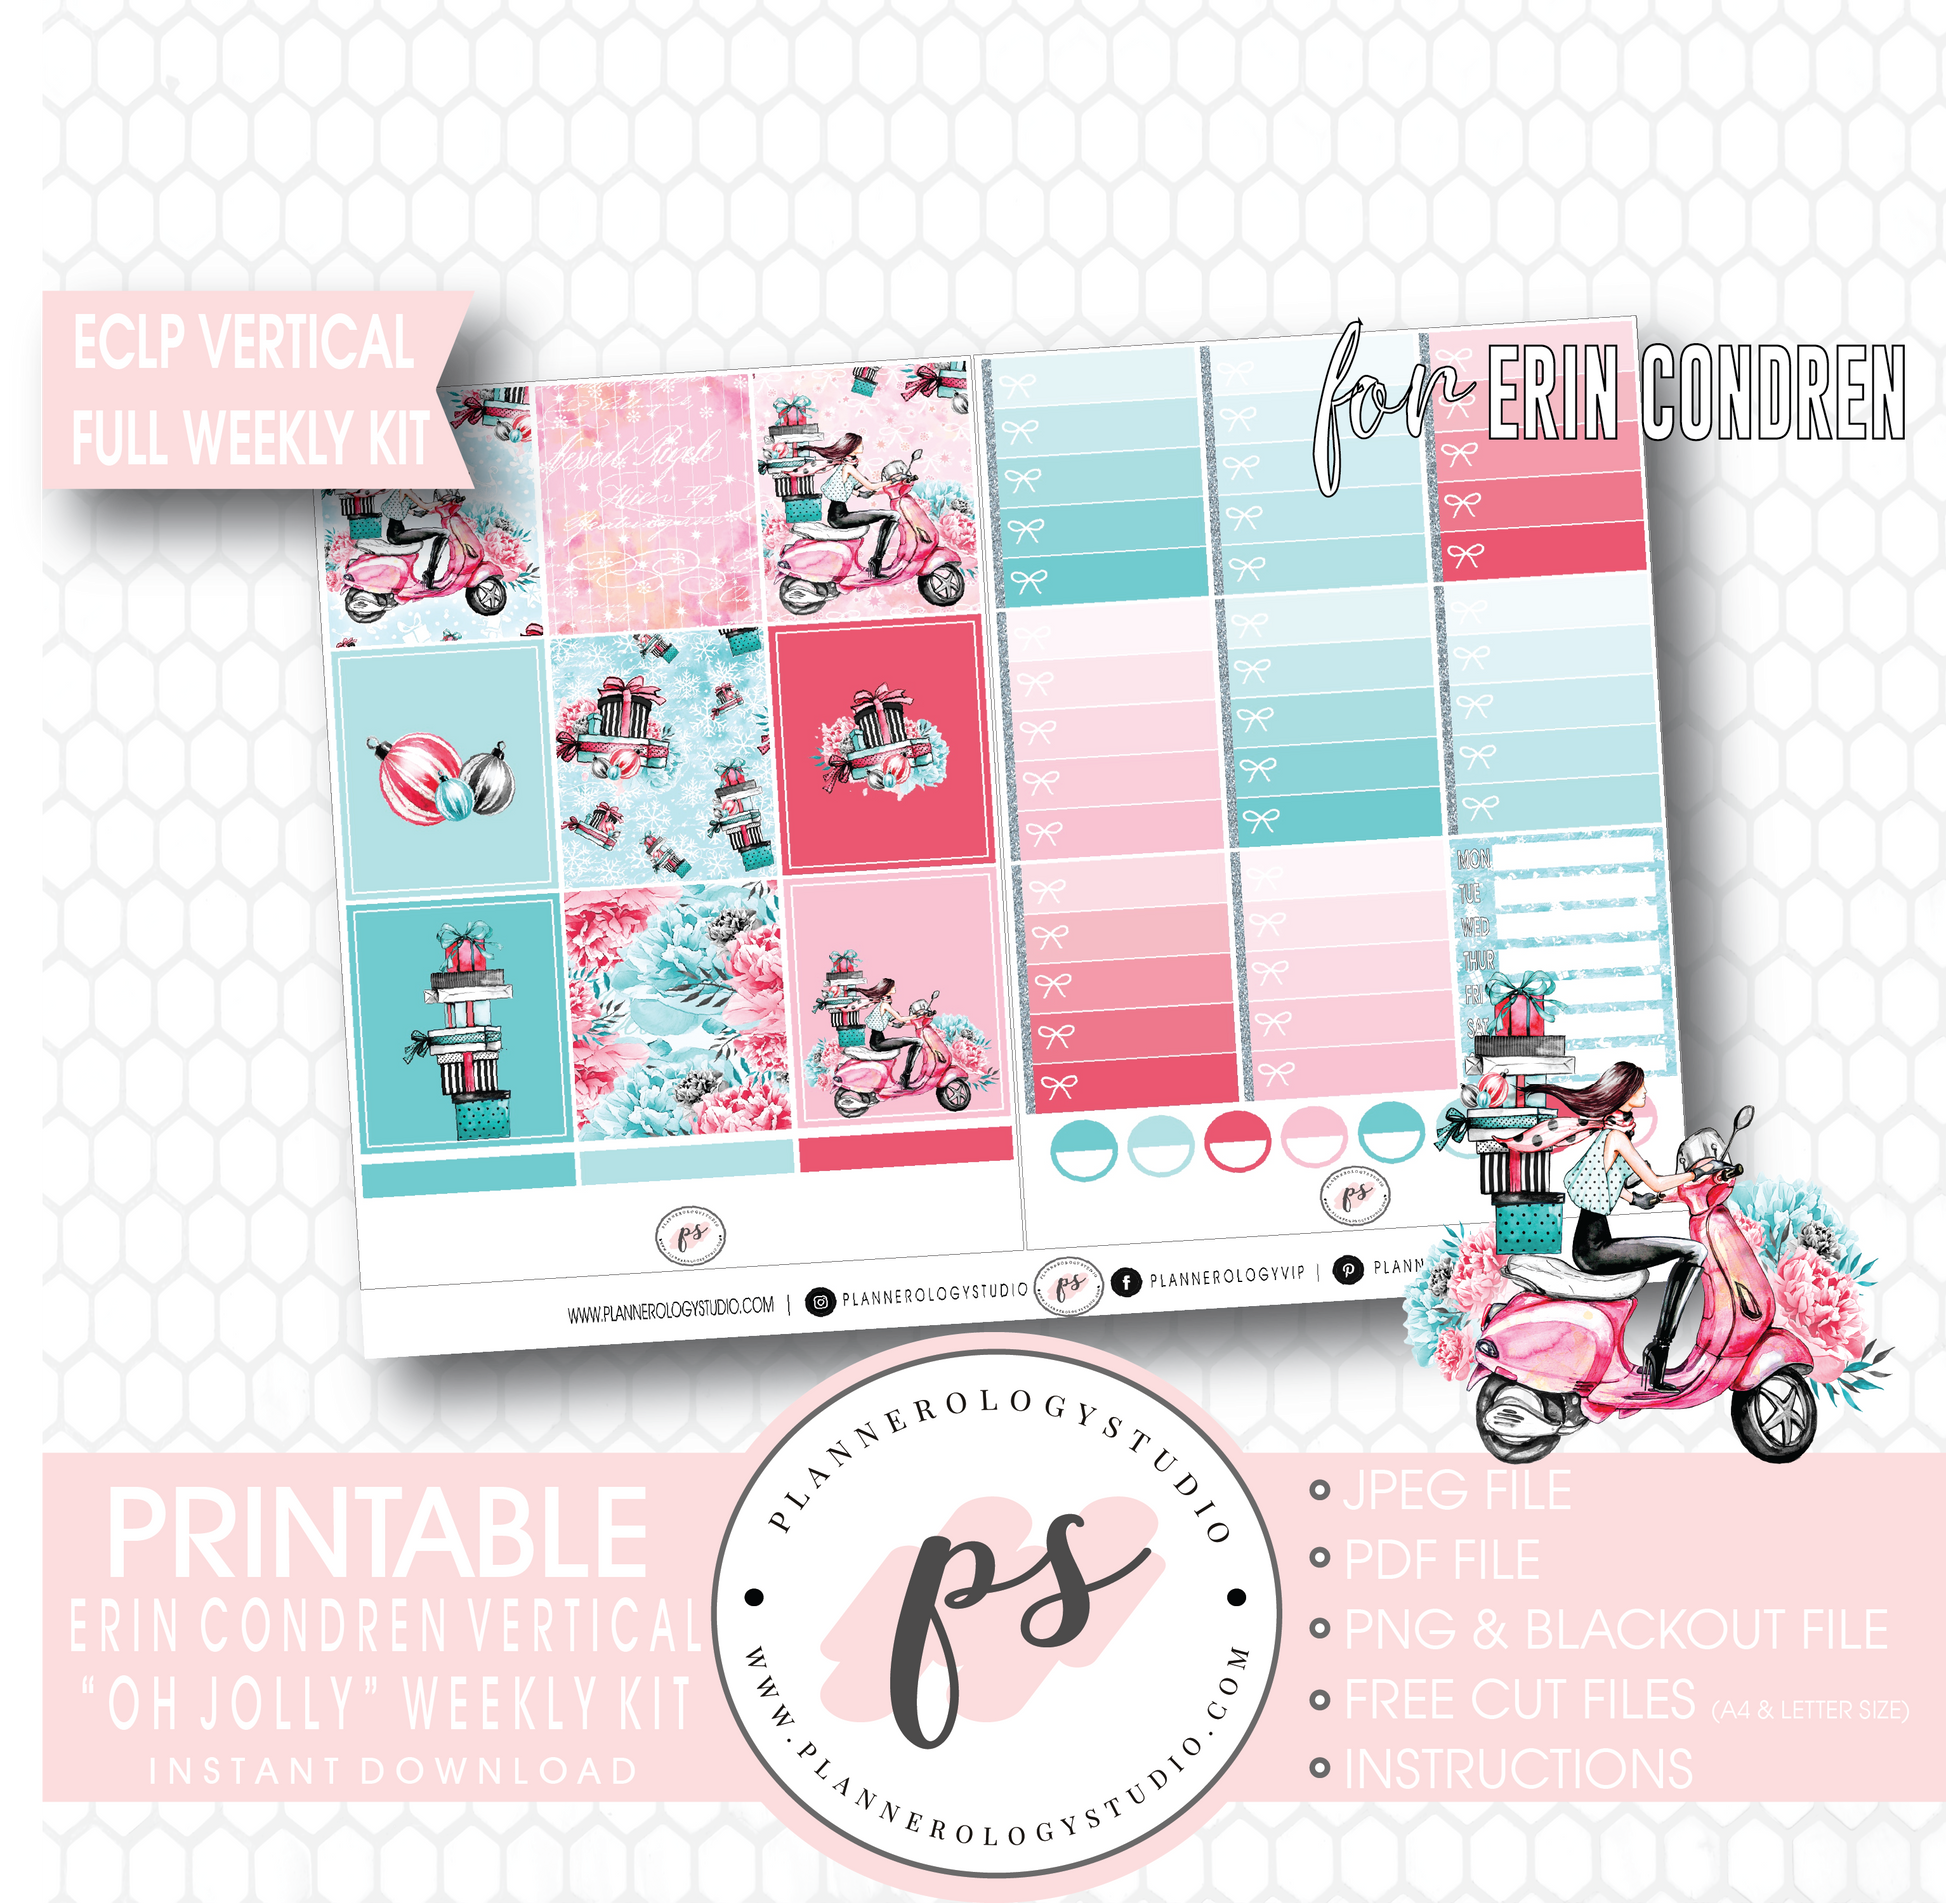 Oh Jolly (Christmas) Full Weekly Kit Printable Planner Digital Stickers (for use with Erin Condren Vertical) - Plannerologystudio